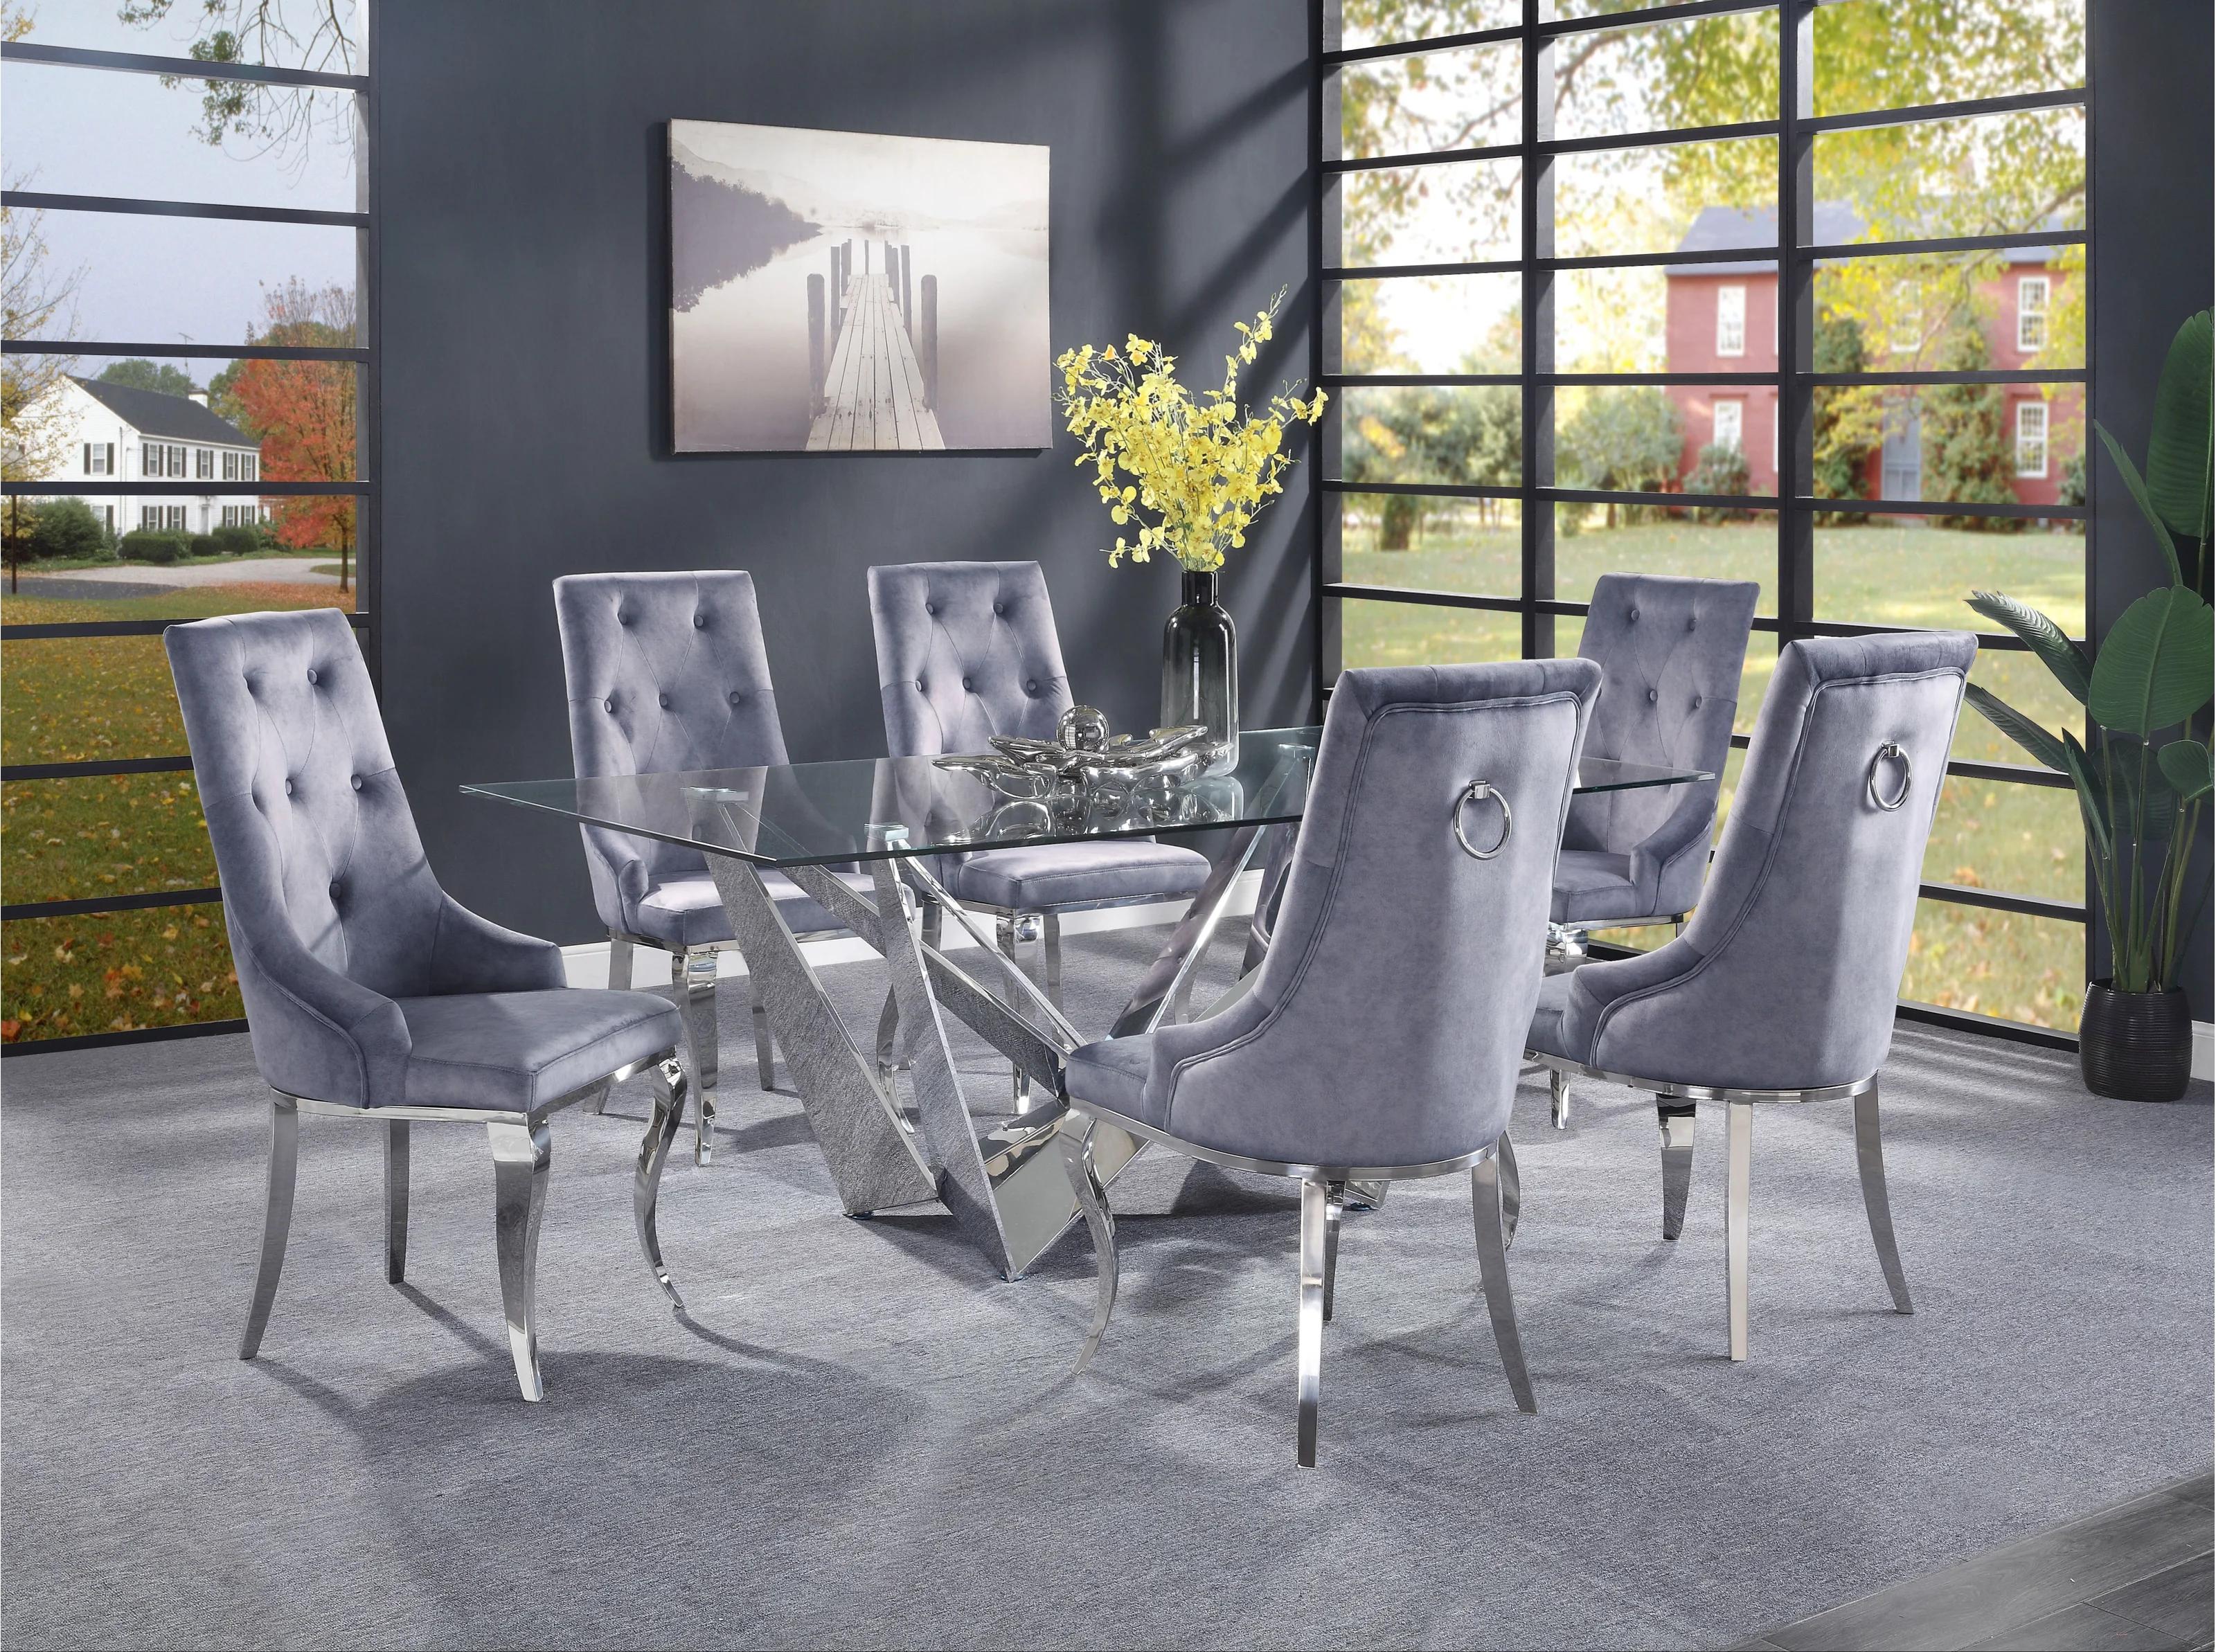 

    
Modern Clear Glass & Stainless Steel 9pcs Dining Set w/ Gray Chairs by Acme Dekel 70140-9pcs
